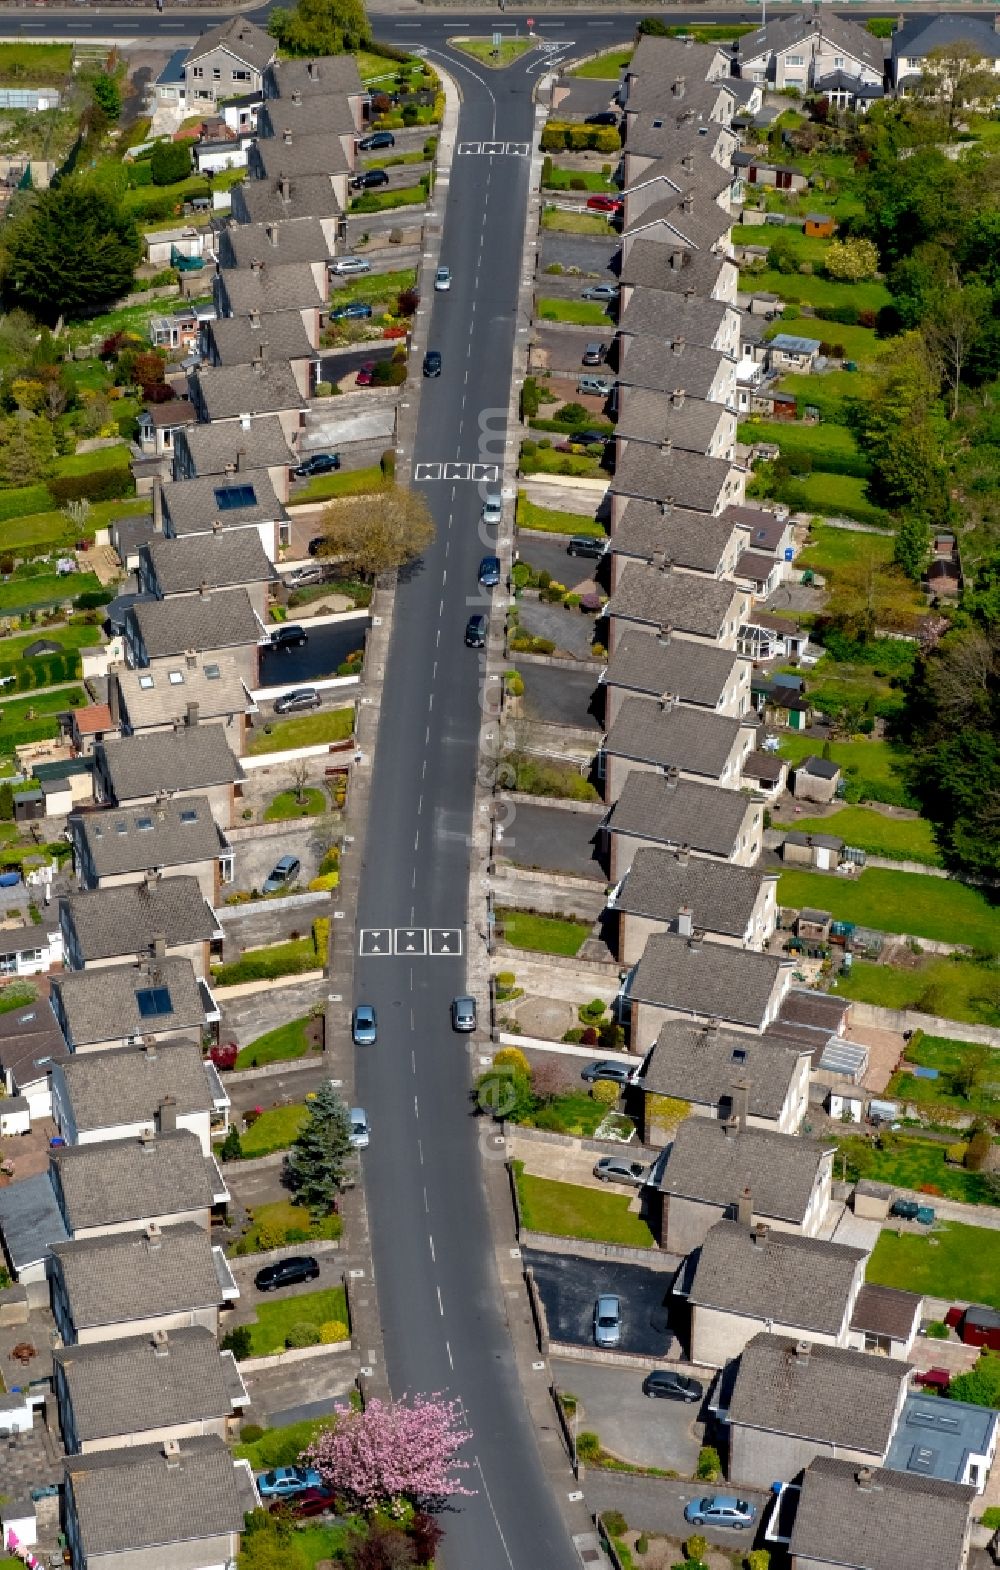 Aerial image Limerick - Residential area a row house settlement Ashbrook in Limerick, Ireland